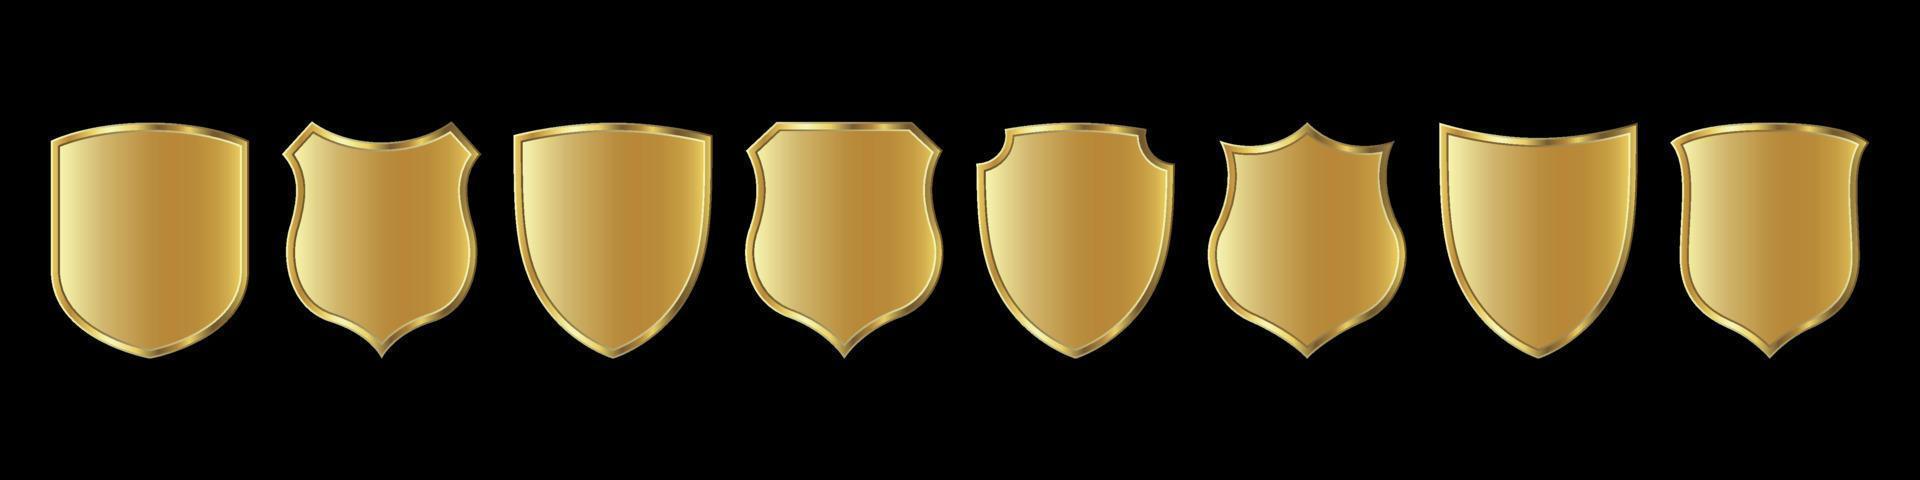 Vector gold shield icons